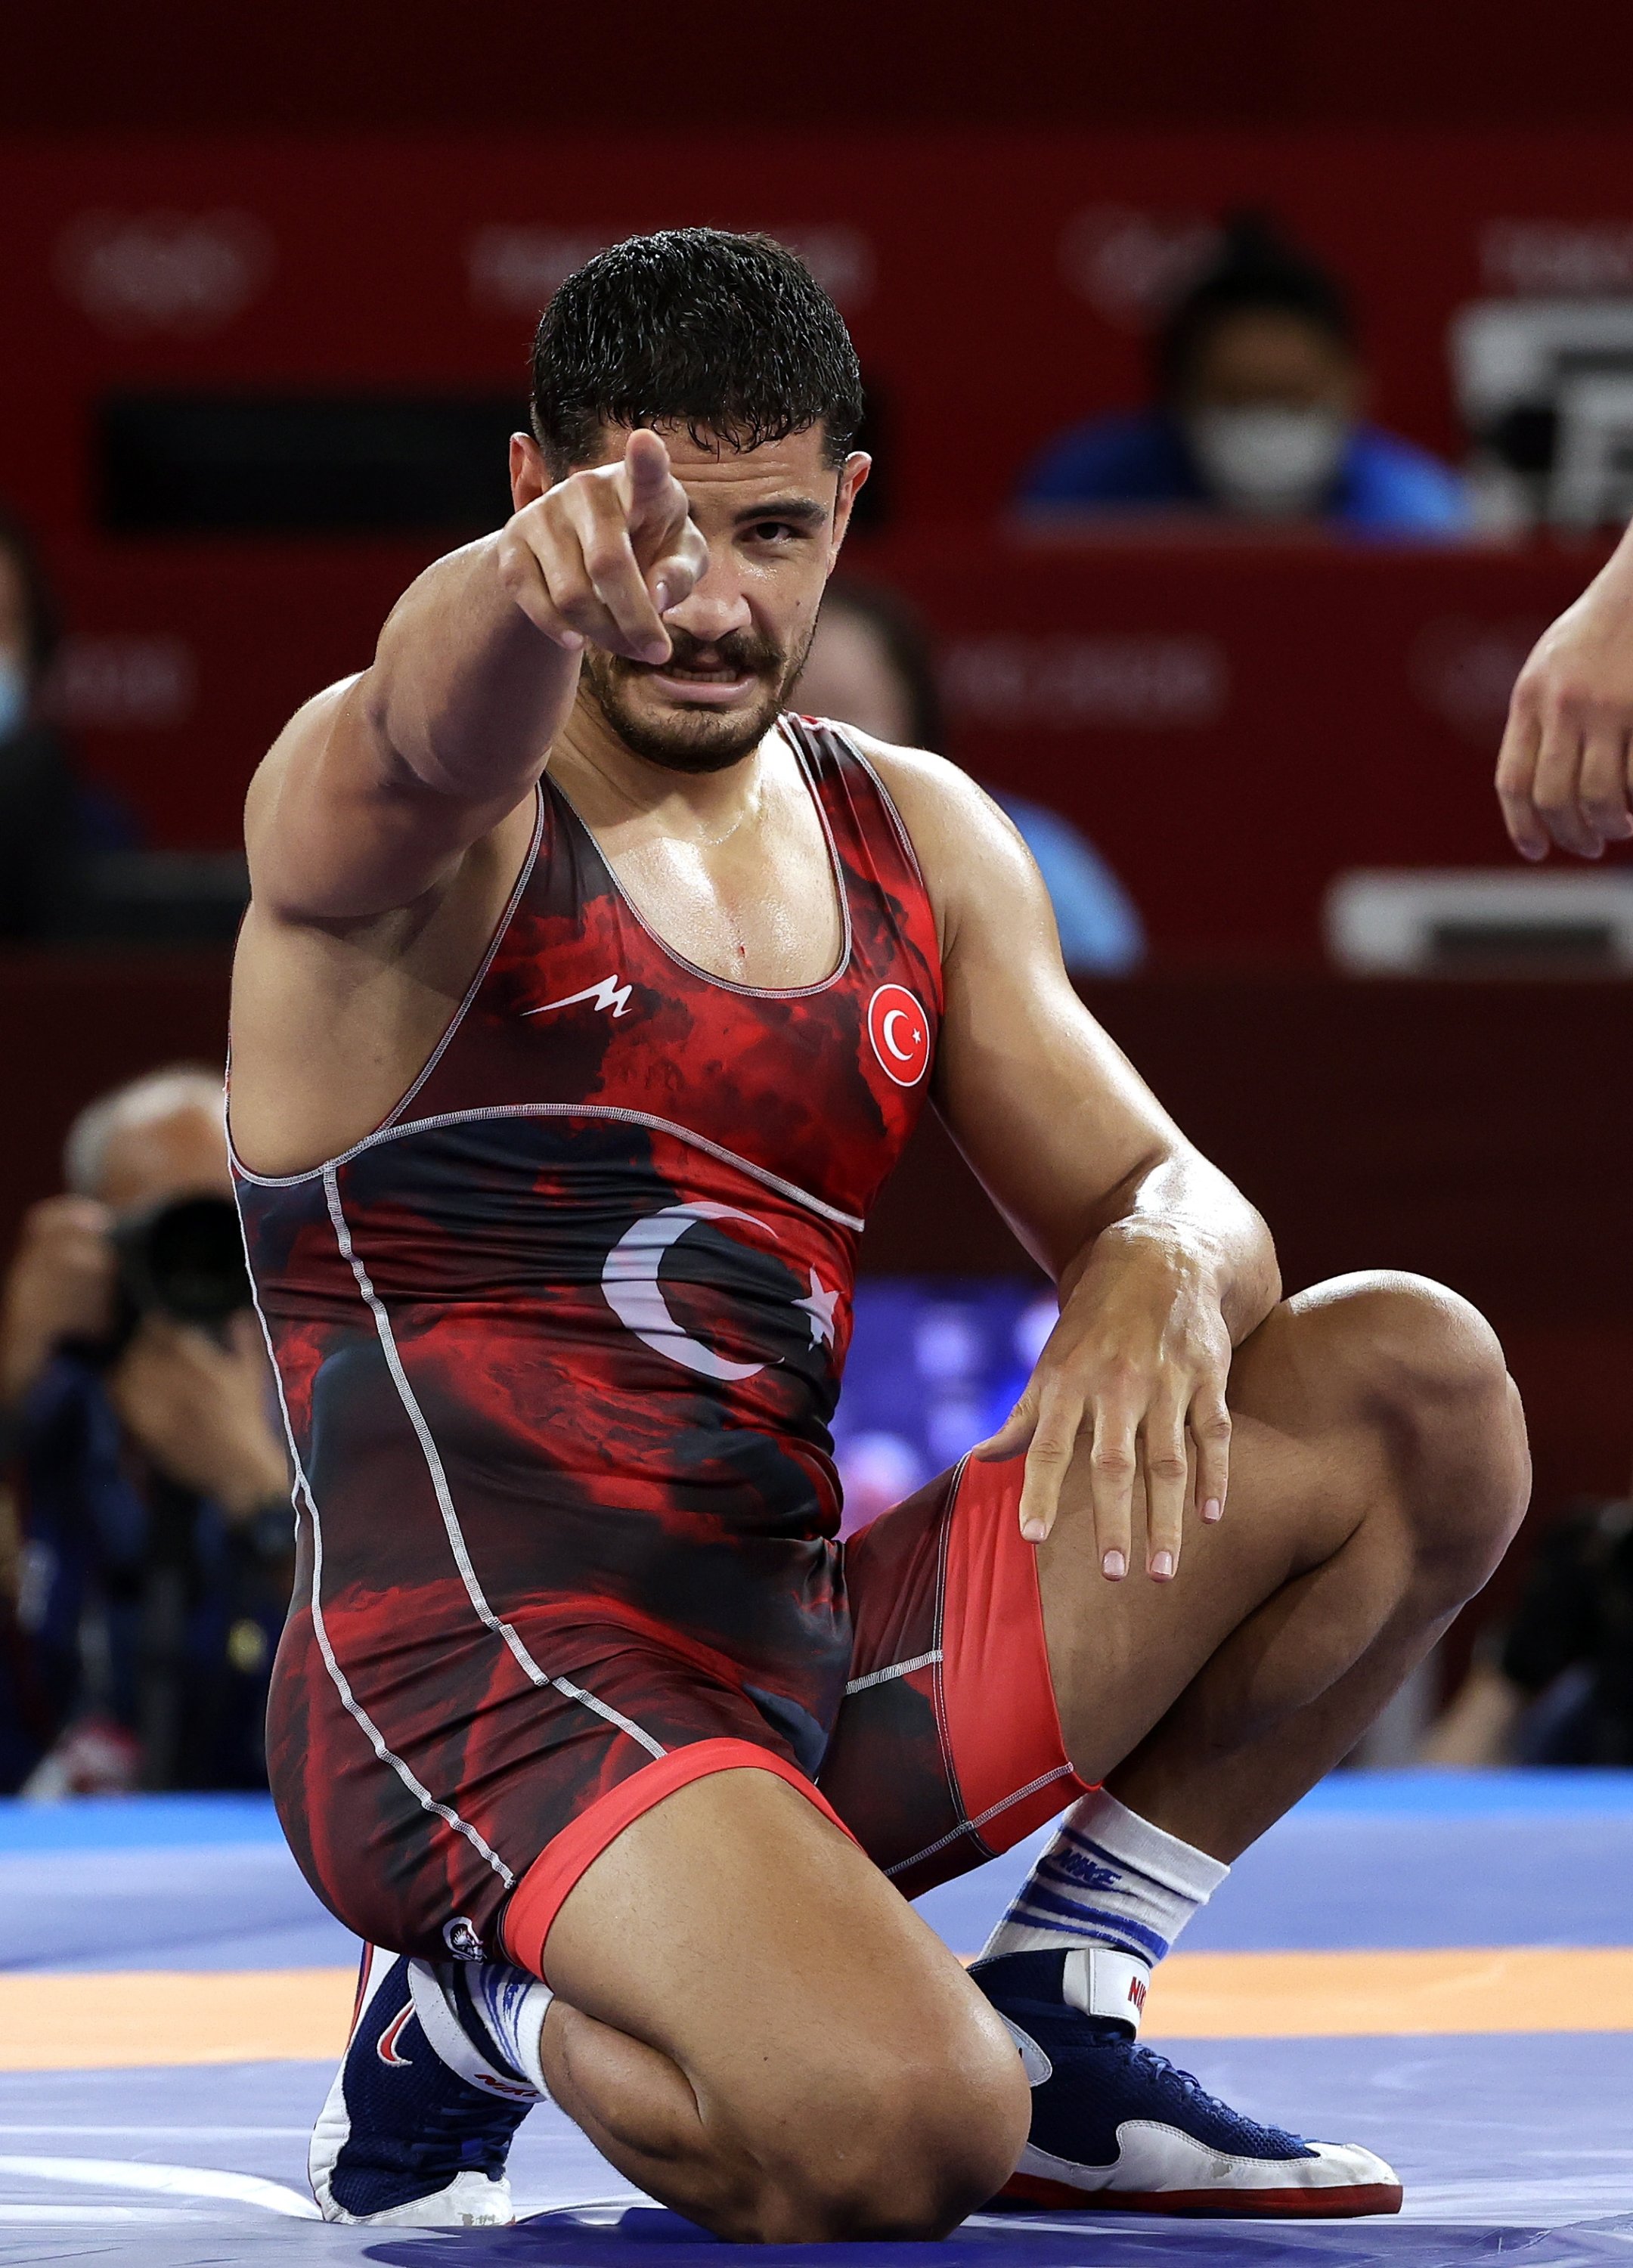 Turkish wrestler Taha Akgül reacts after defeating Mongolia's Lkhagvagerel Munkhtur in the Tokyo 2020 men's freestyle 125-kg bronze-medal match at the Makuhari Messe, Chiba, Japan, Aug. 6, 2021. (EPA Photo)